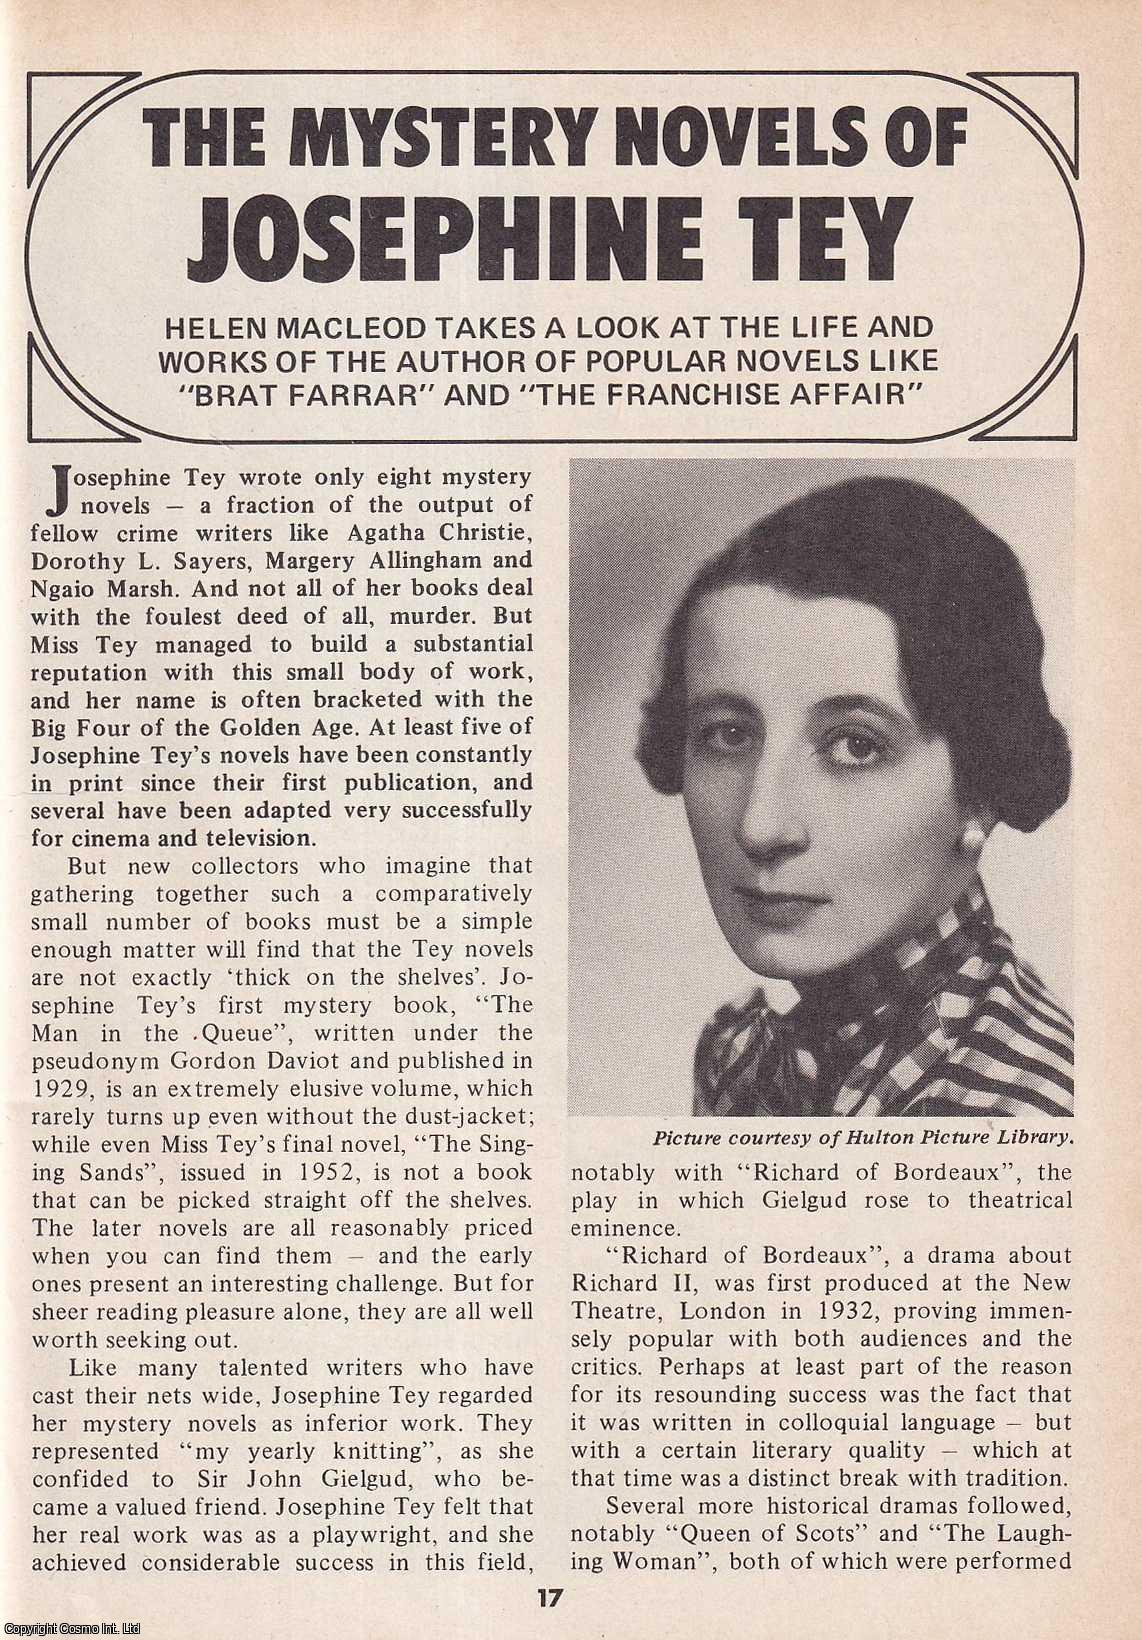 Helen Macleod - The Mystery Novels of Josephine Tey. Taking a Look at The Life and Works of The Author. This is an original article separated from an issue of The Book & Magazine Collector publication.